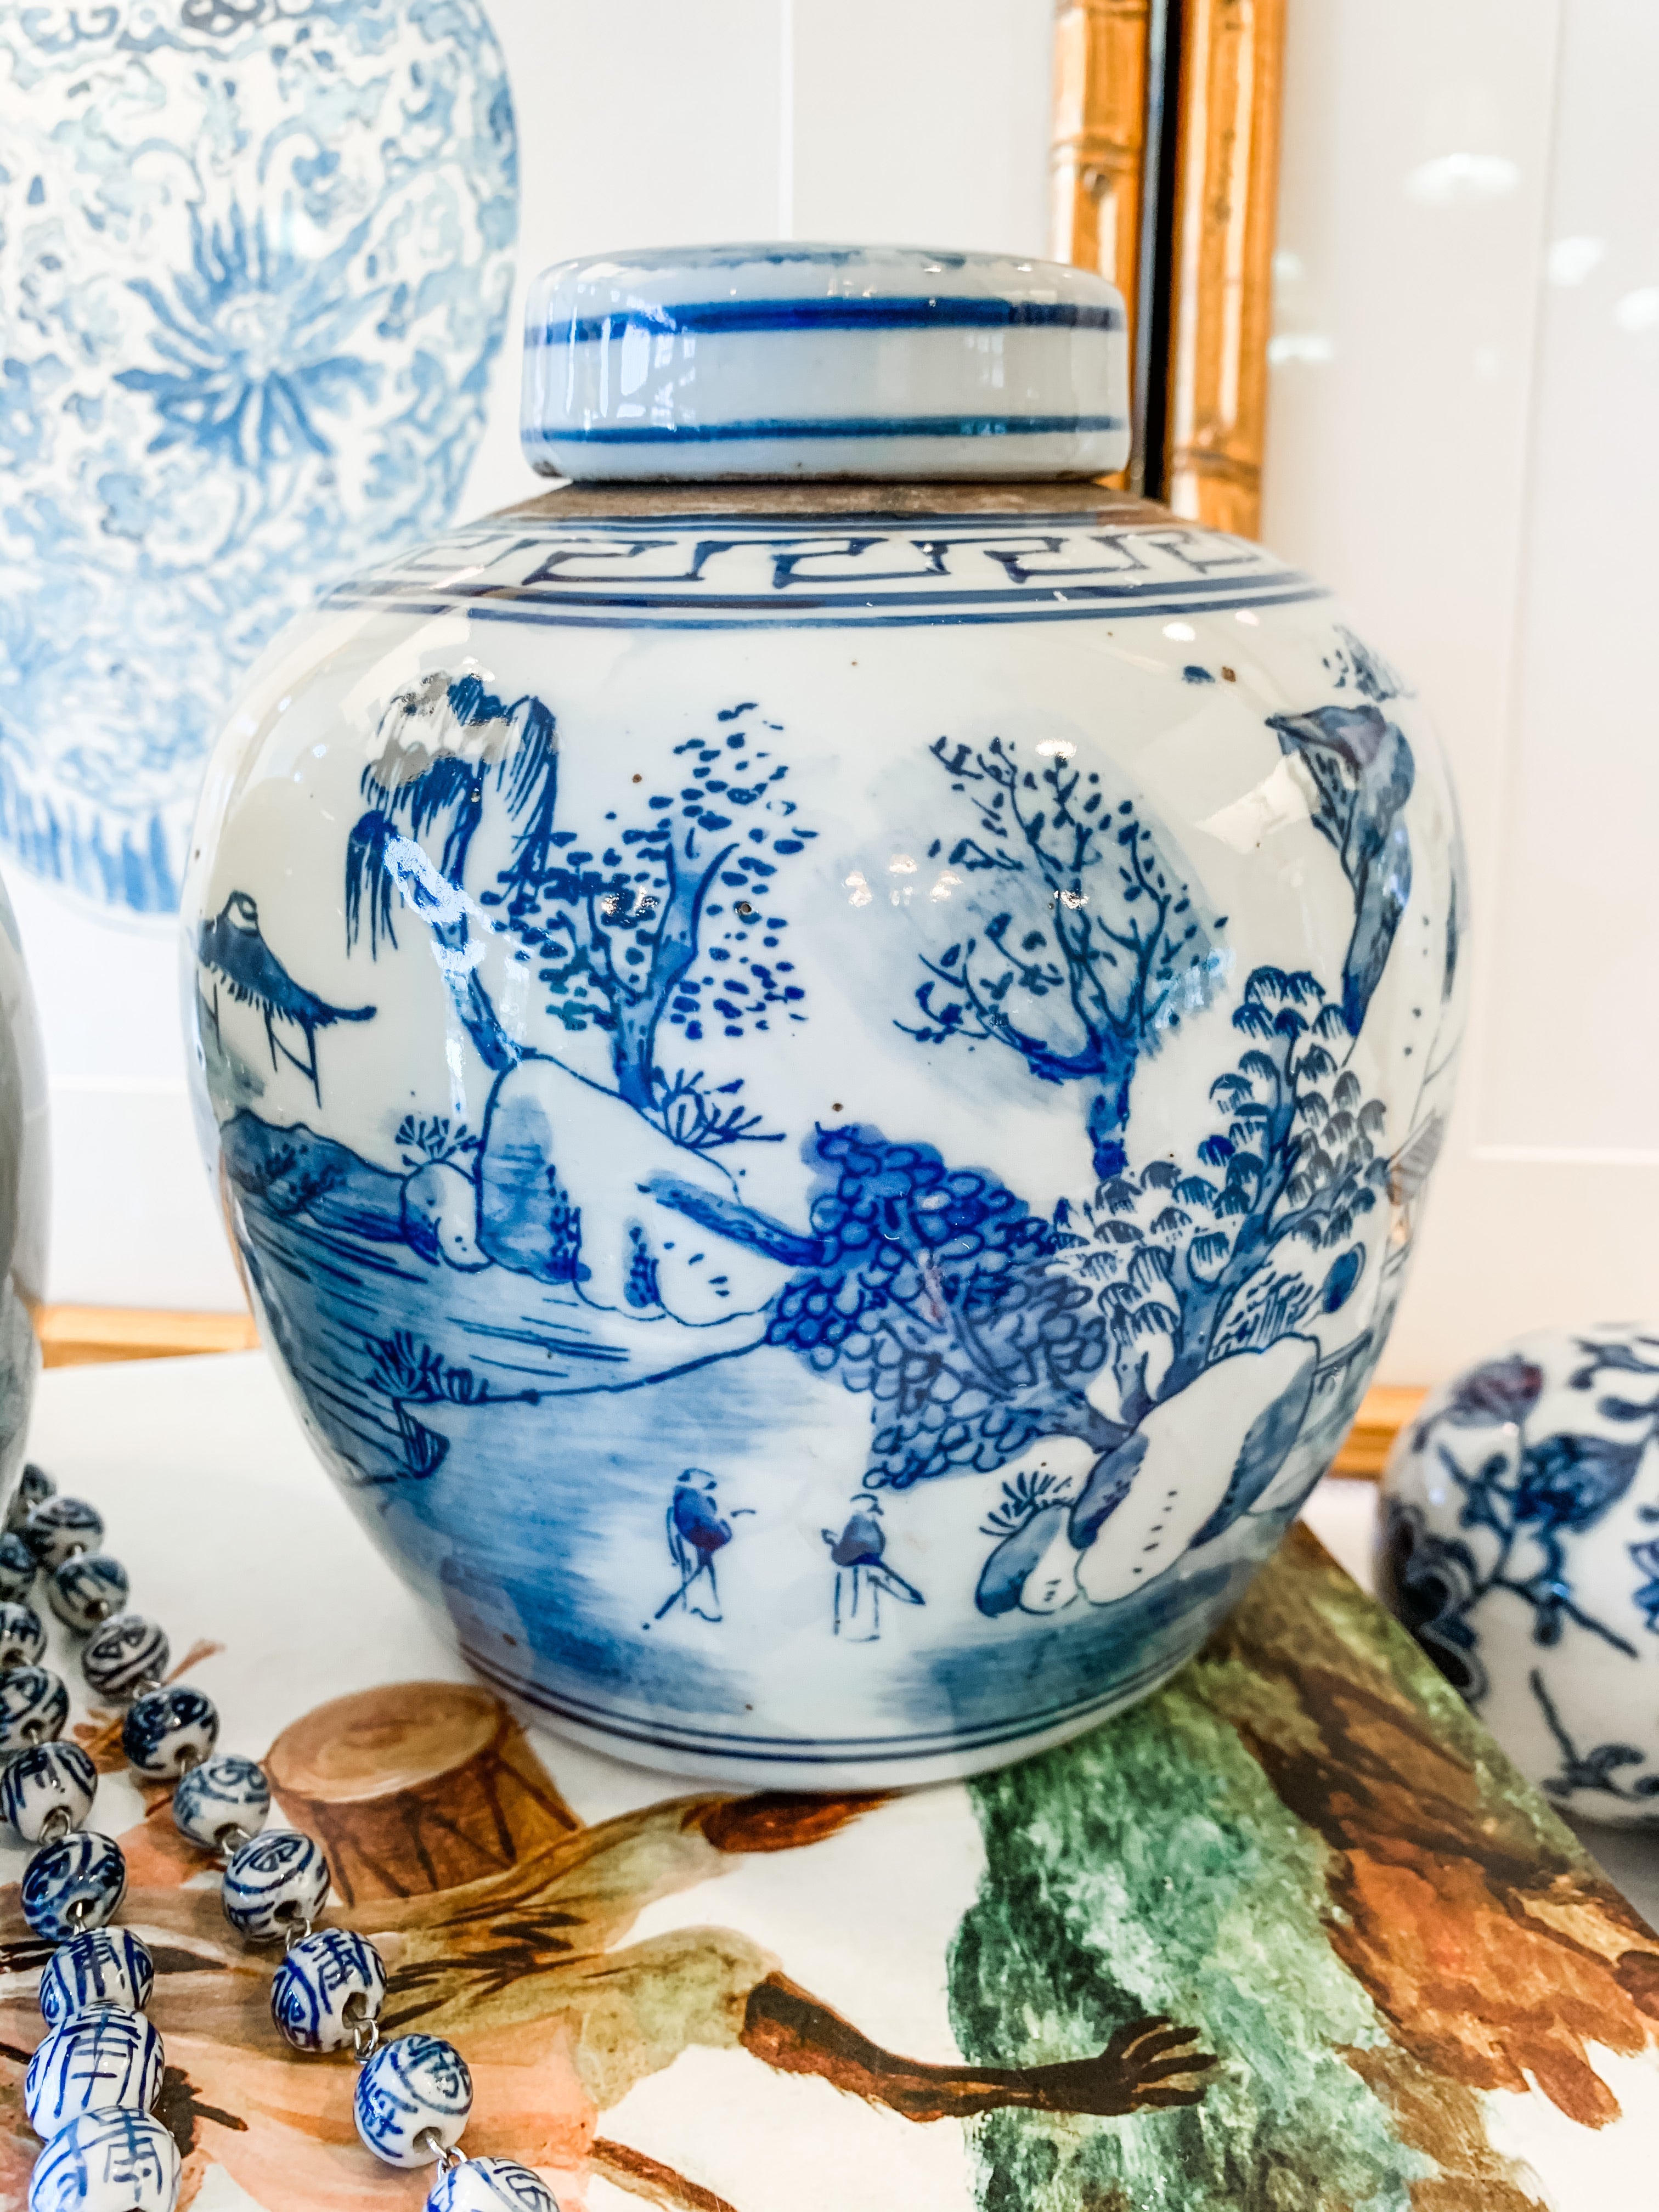 Shop Collectible Brooks for a wide selection of classic blue and white ginger jars, perfect for adding a touch of chinoiserie to your home decor!  This beautiful hand painted jar is made in the antique style and features a landscape design.  It stands 6.5" tall.  